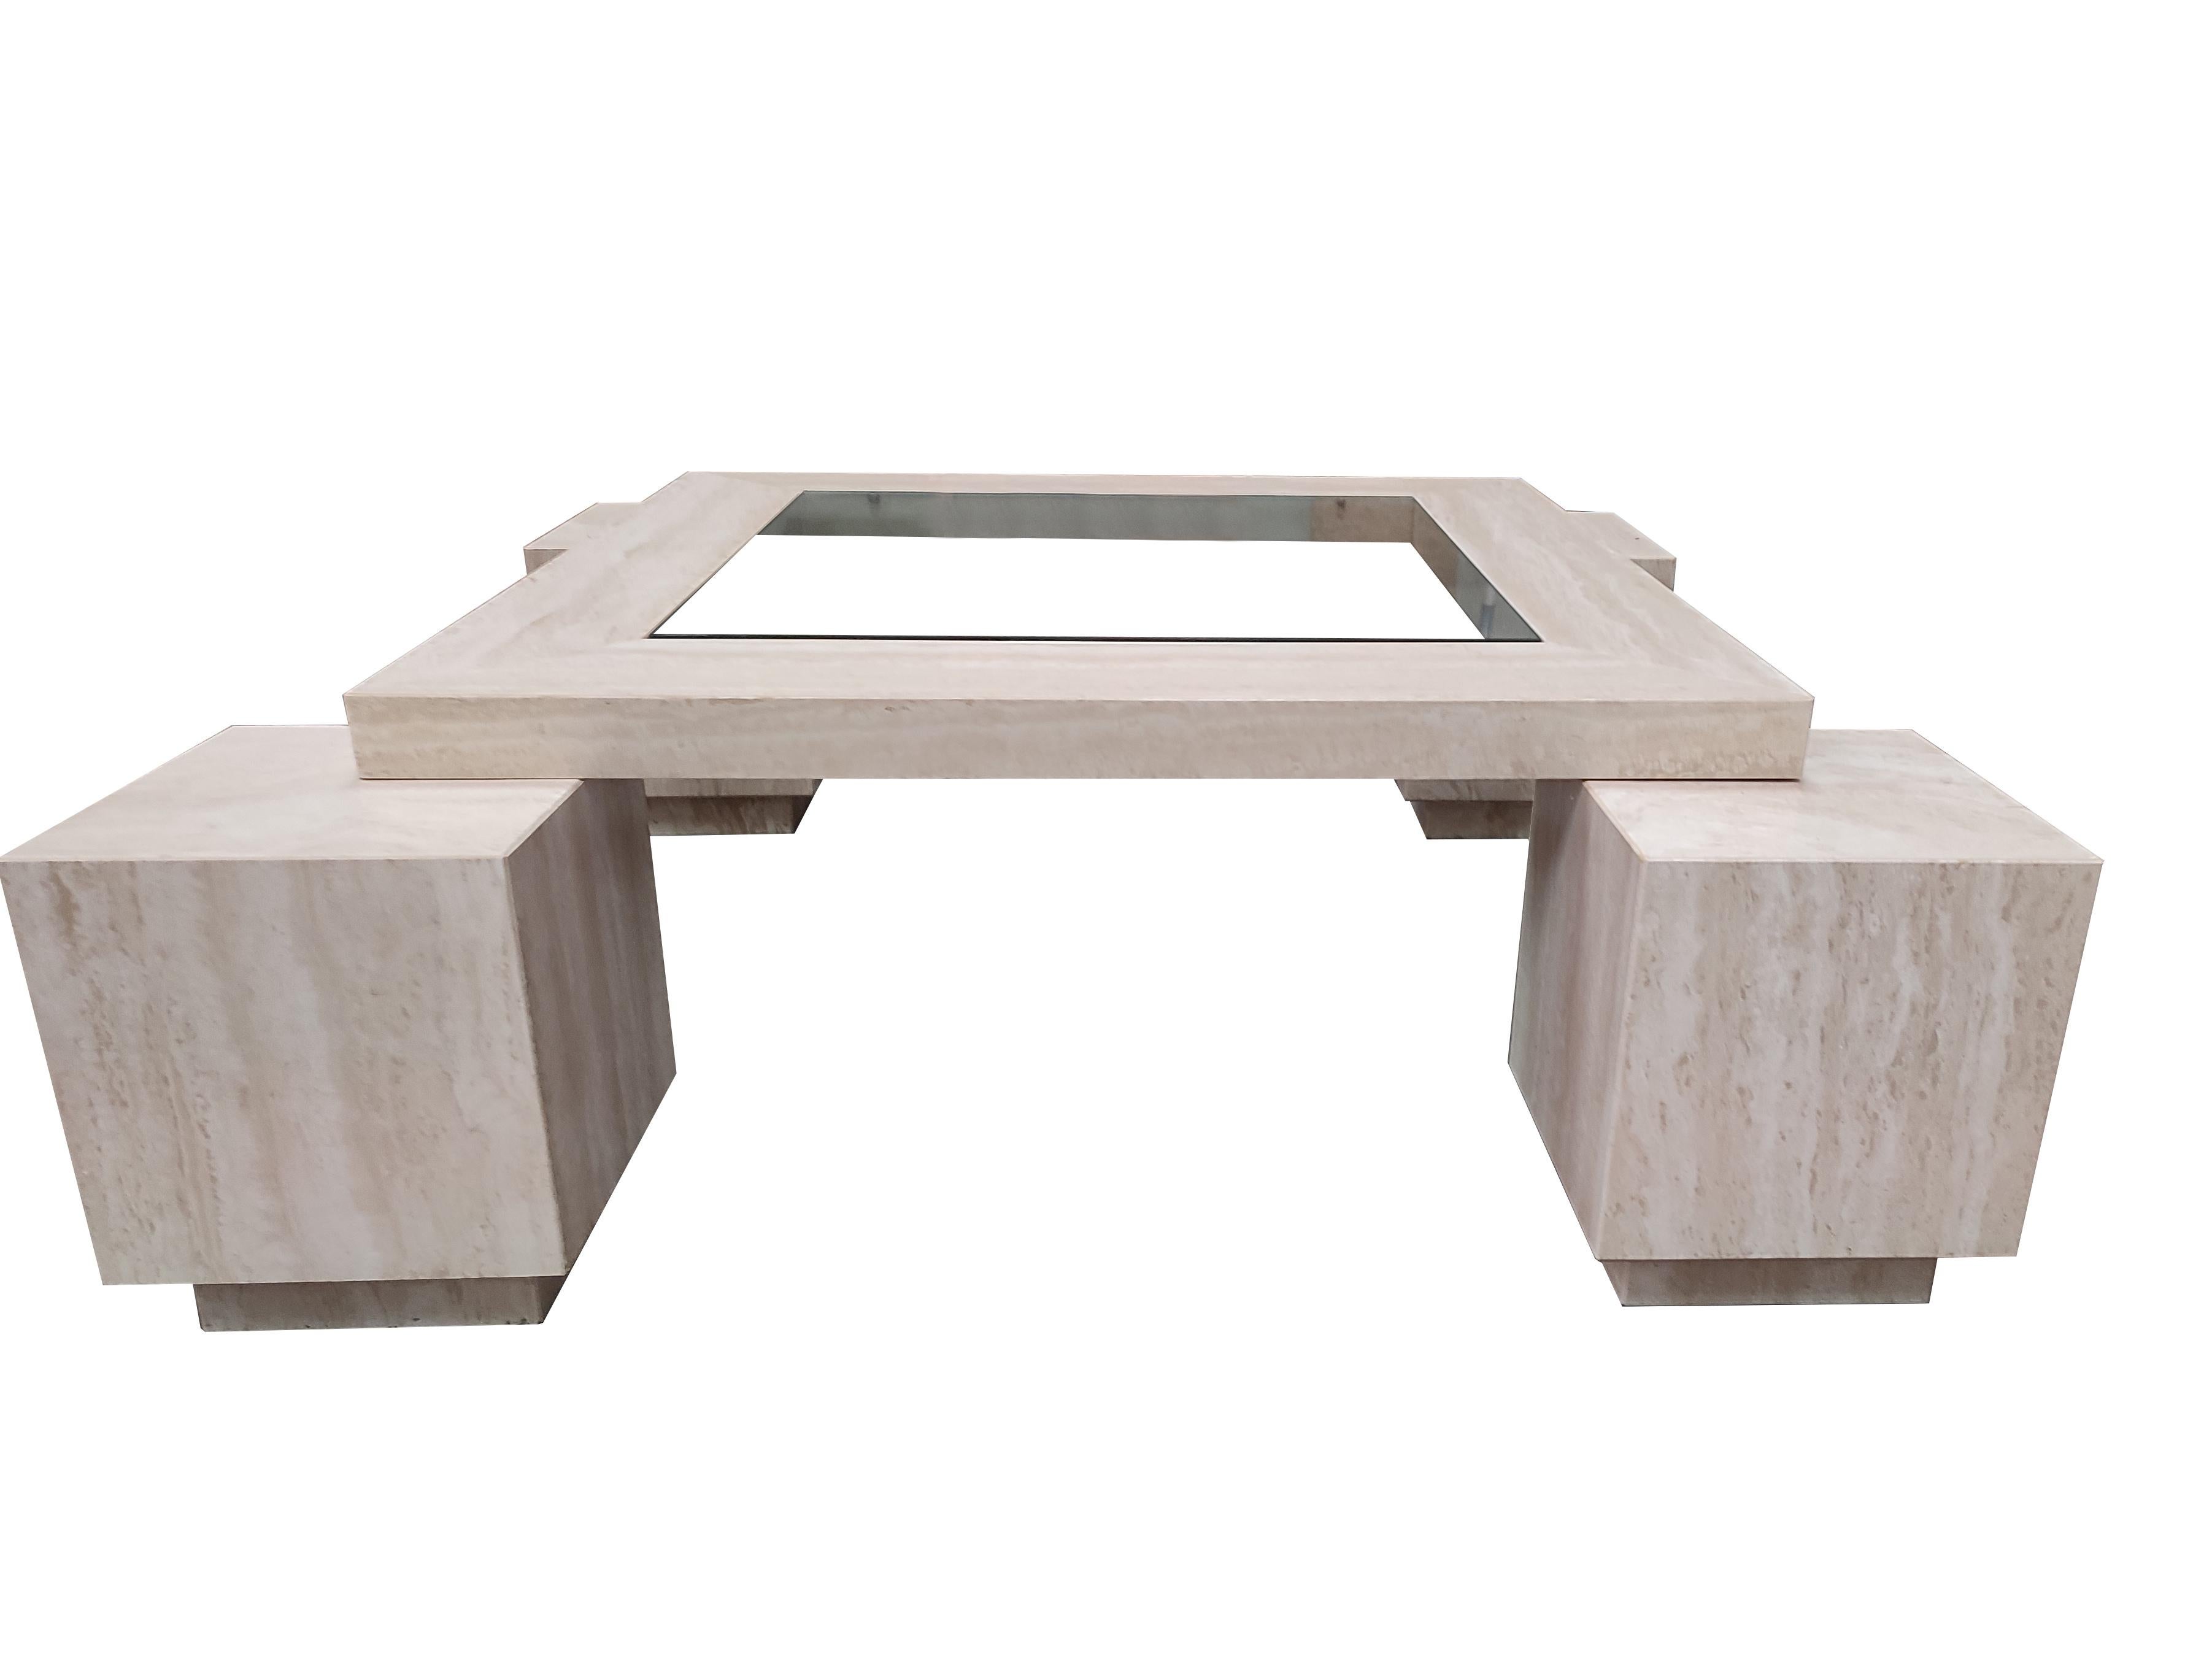 CUADROS MidCentury Polished Travertine Marble Coffee Table Original 80's Piece
The Cuadros coffee table is made of Roman travertine marble in polished finish, and the top contains a recessed glass top. The table has four cube-shaped legs that